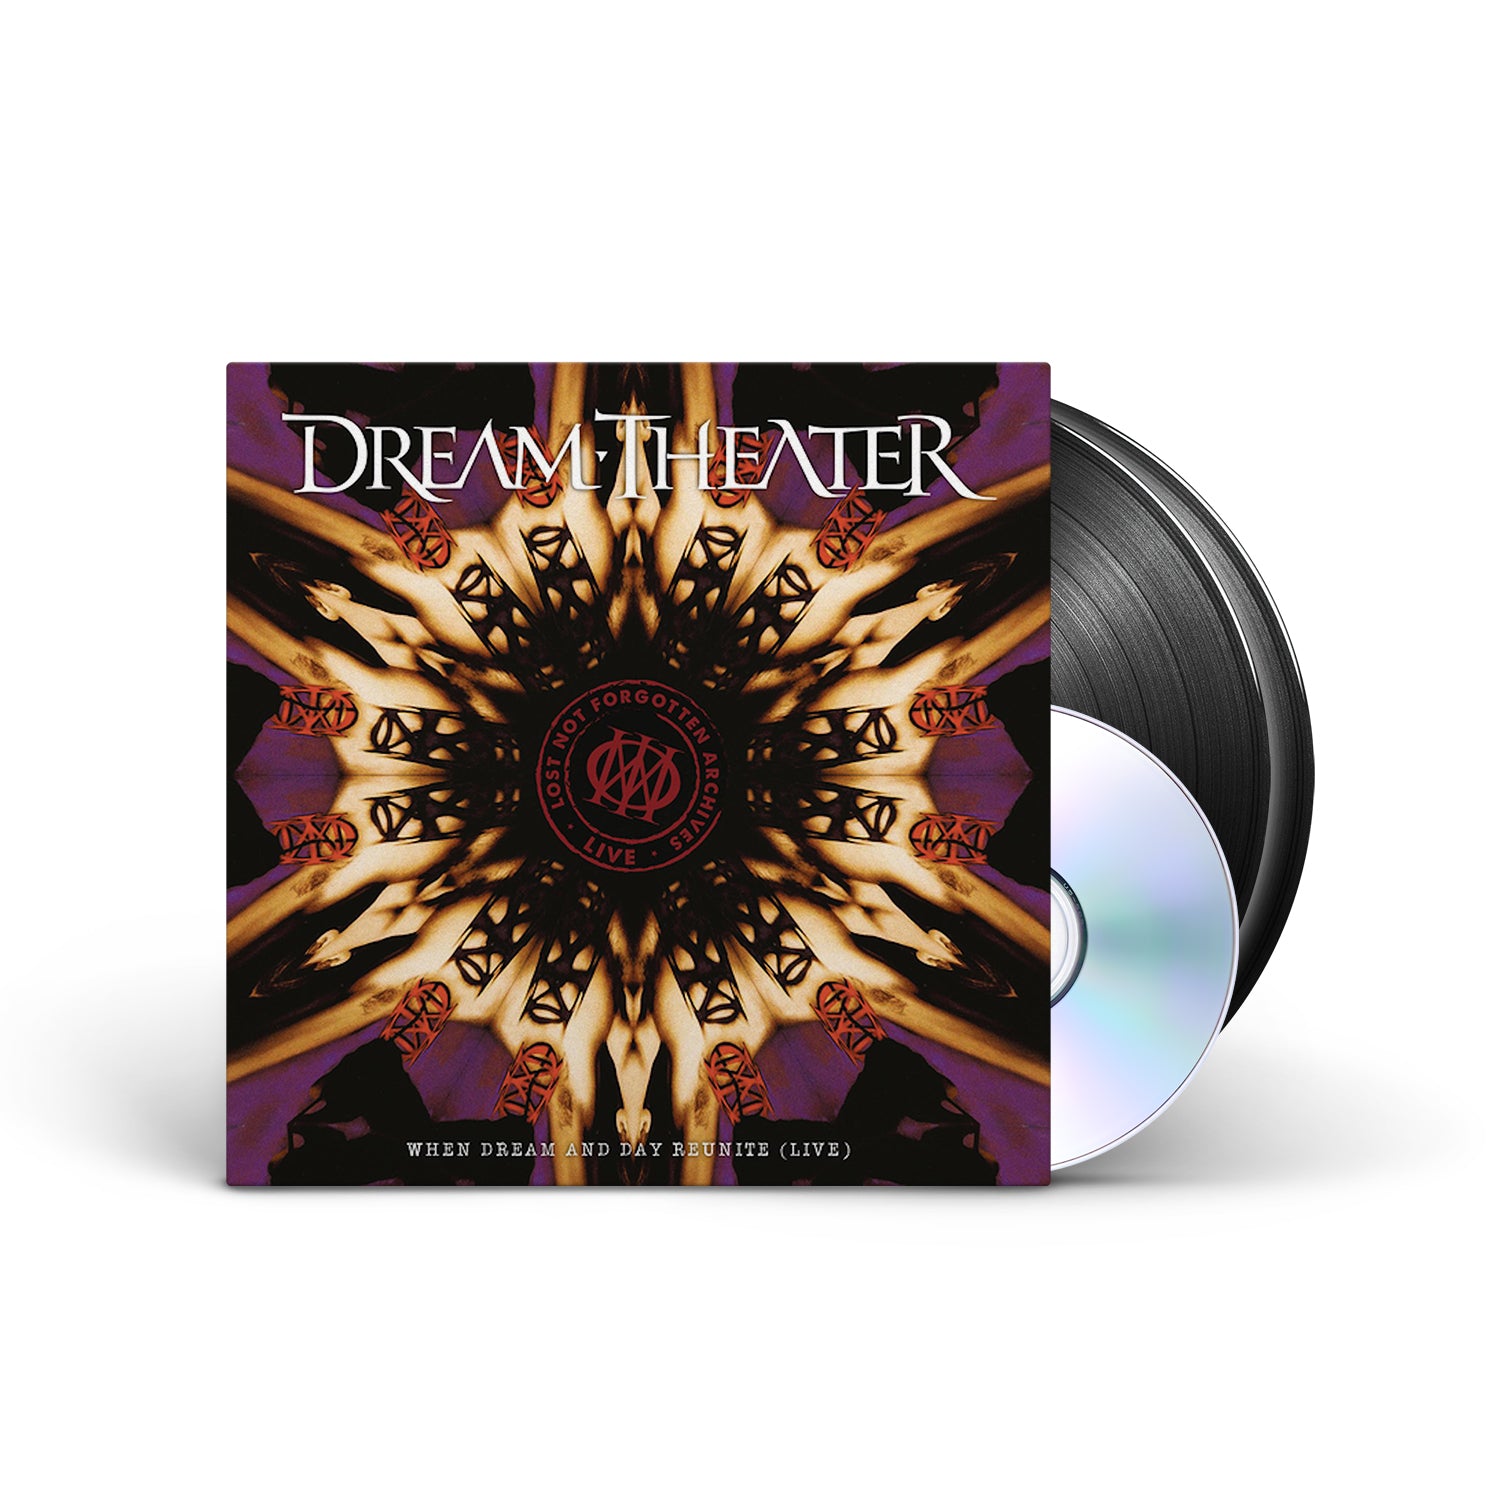 DREAM THEATER - Lost Not Forgotten Archives: When Dream And Day Reunite (Live) - 2xLP + CD